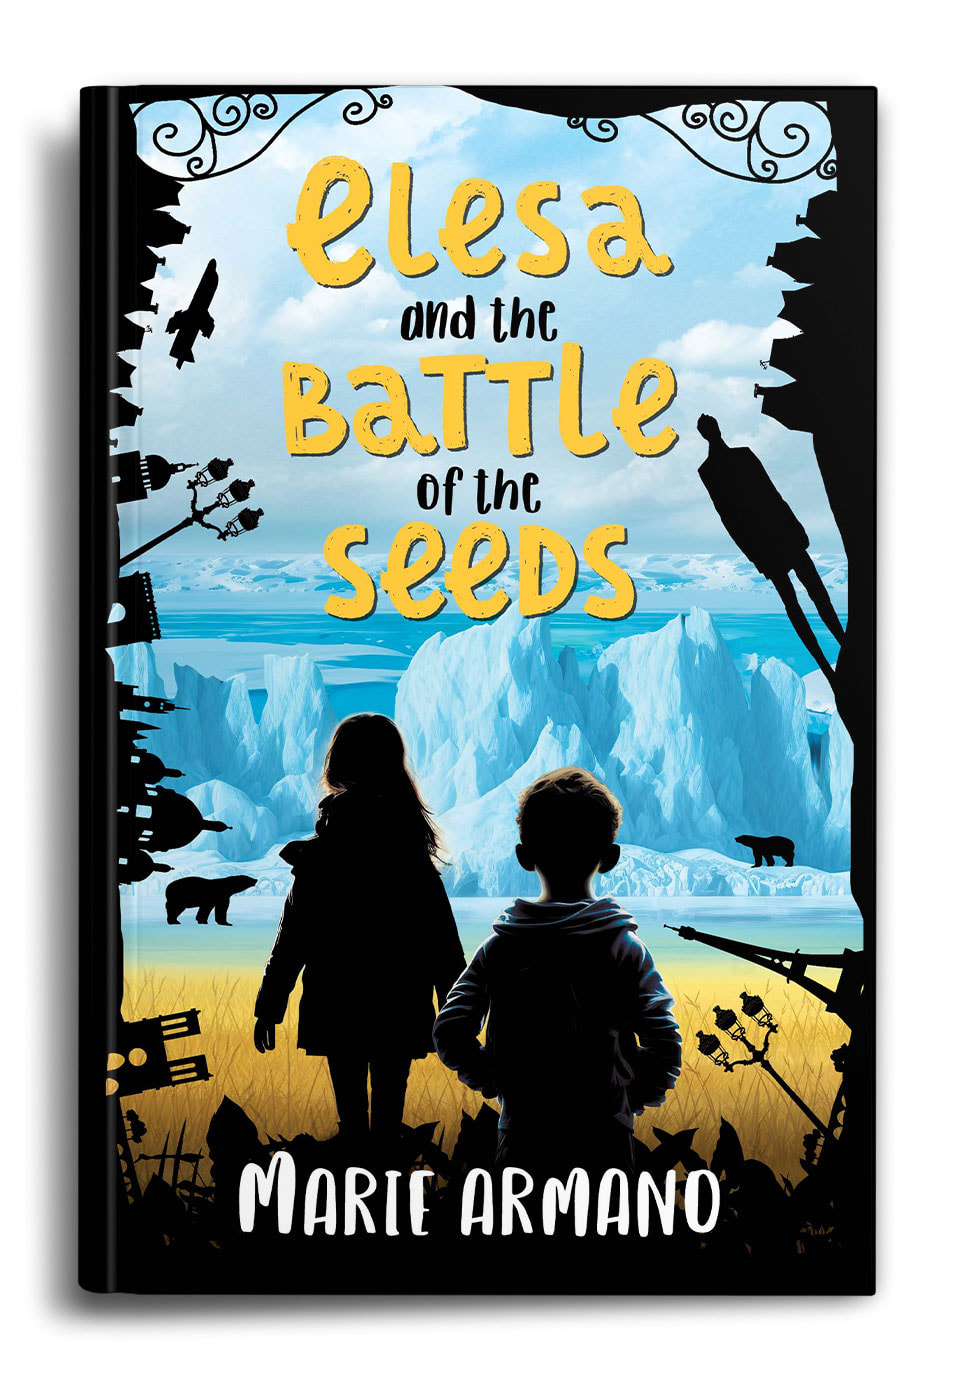 Elesa-and-the-battle-of-the-seeds-by-marie-armano